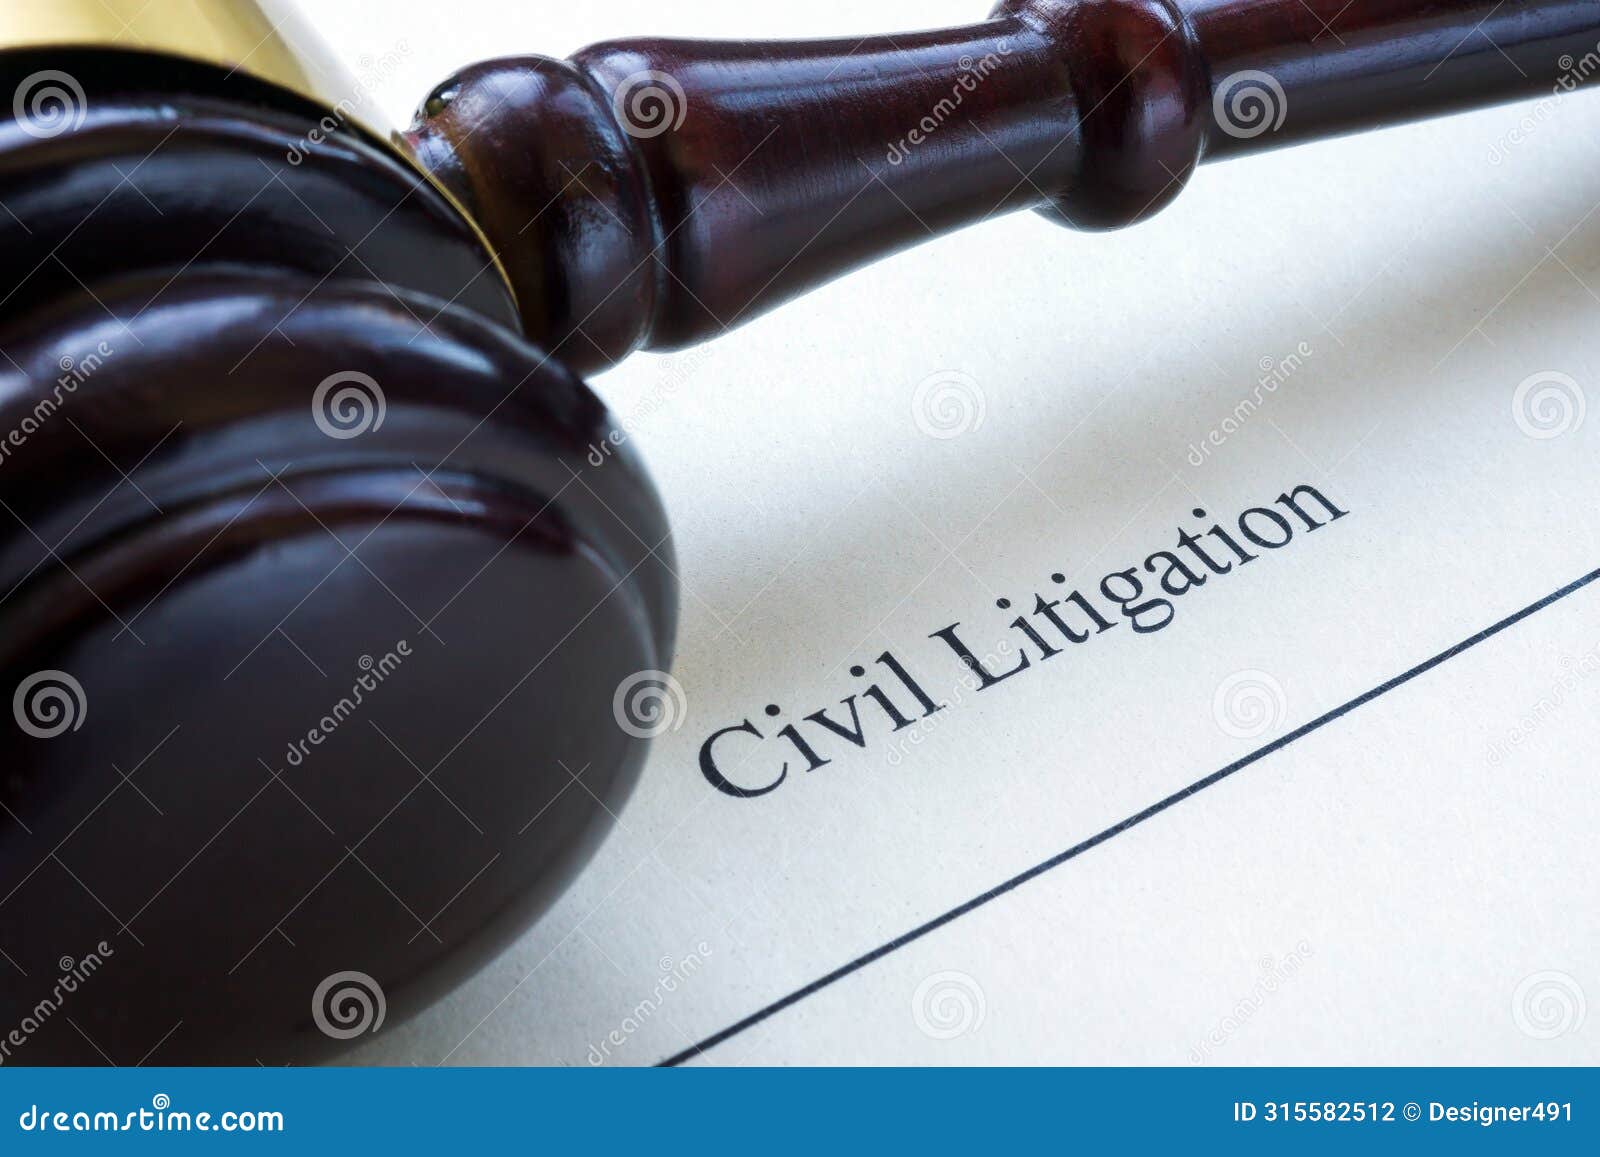 close up of civil litigation document and gavel.